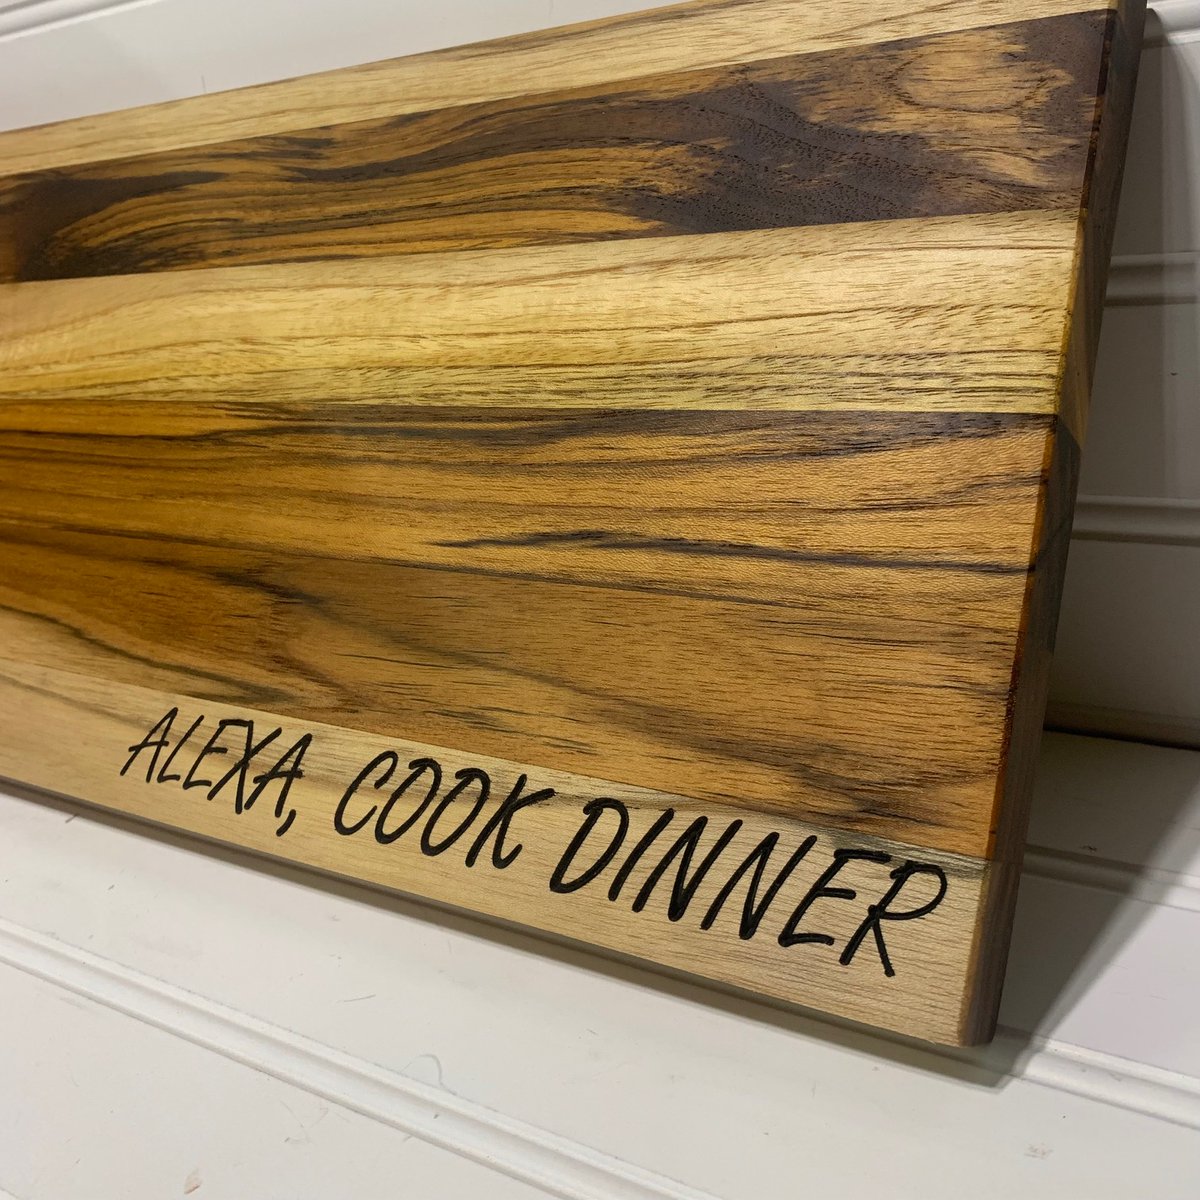 Alexa, Cook Dinner - 8' x 18' cutting board. Sized to not take a lot of counter space and works great for camping / RV. Made from 1' thick Teak boards. 

Check Us Out
dobynsfamilycreations.com
dobynsfamcreations.etsy.com

#kitchendecor